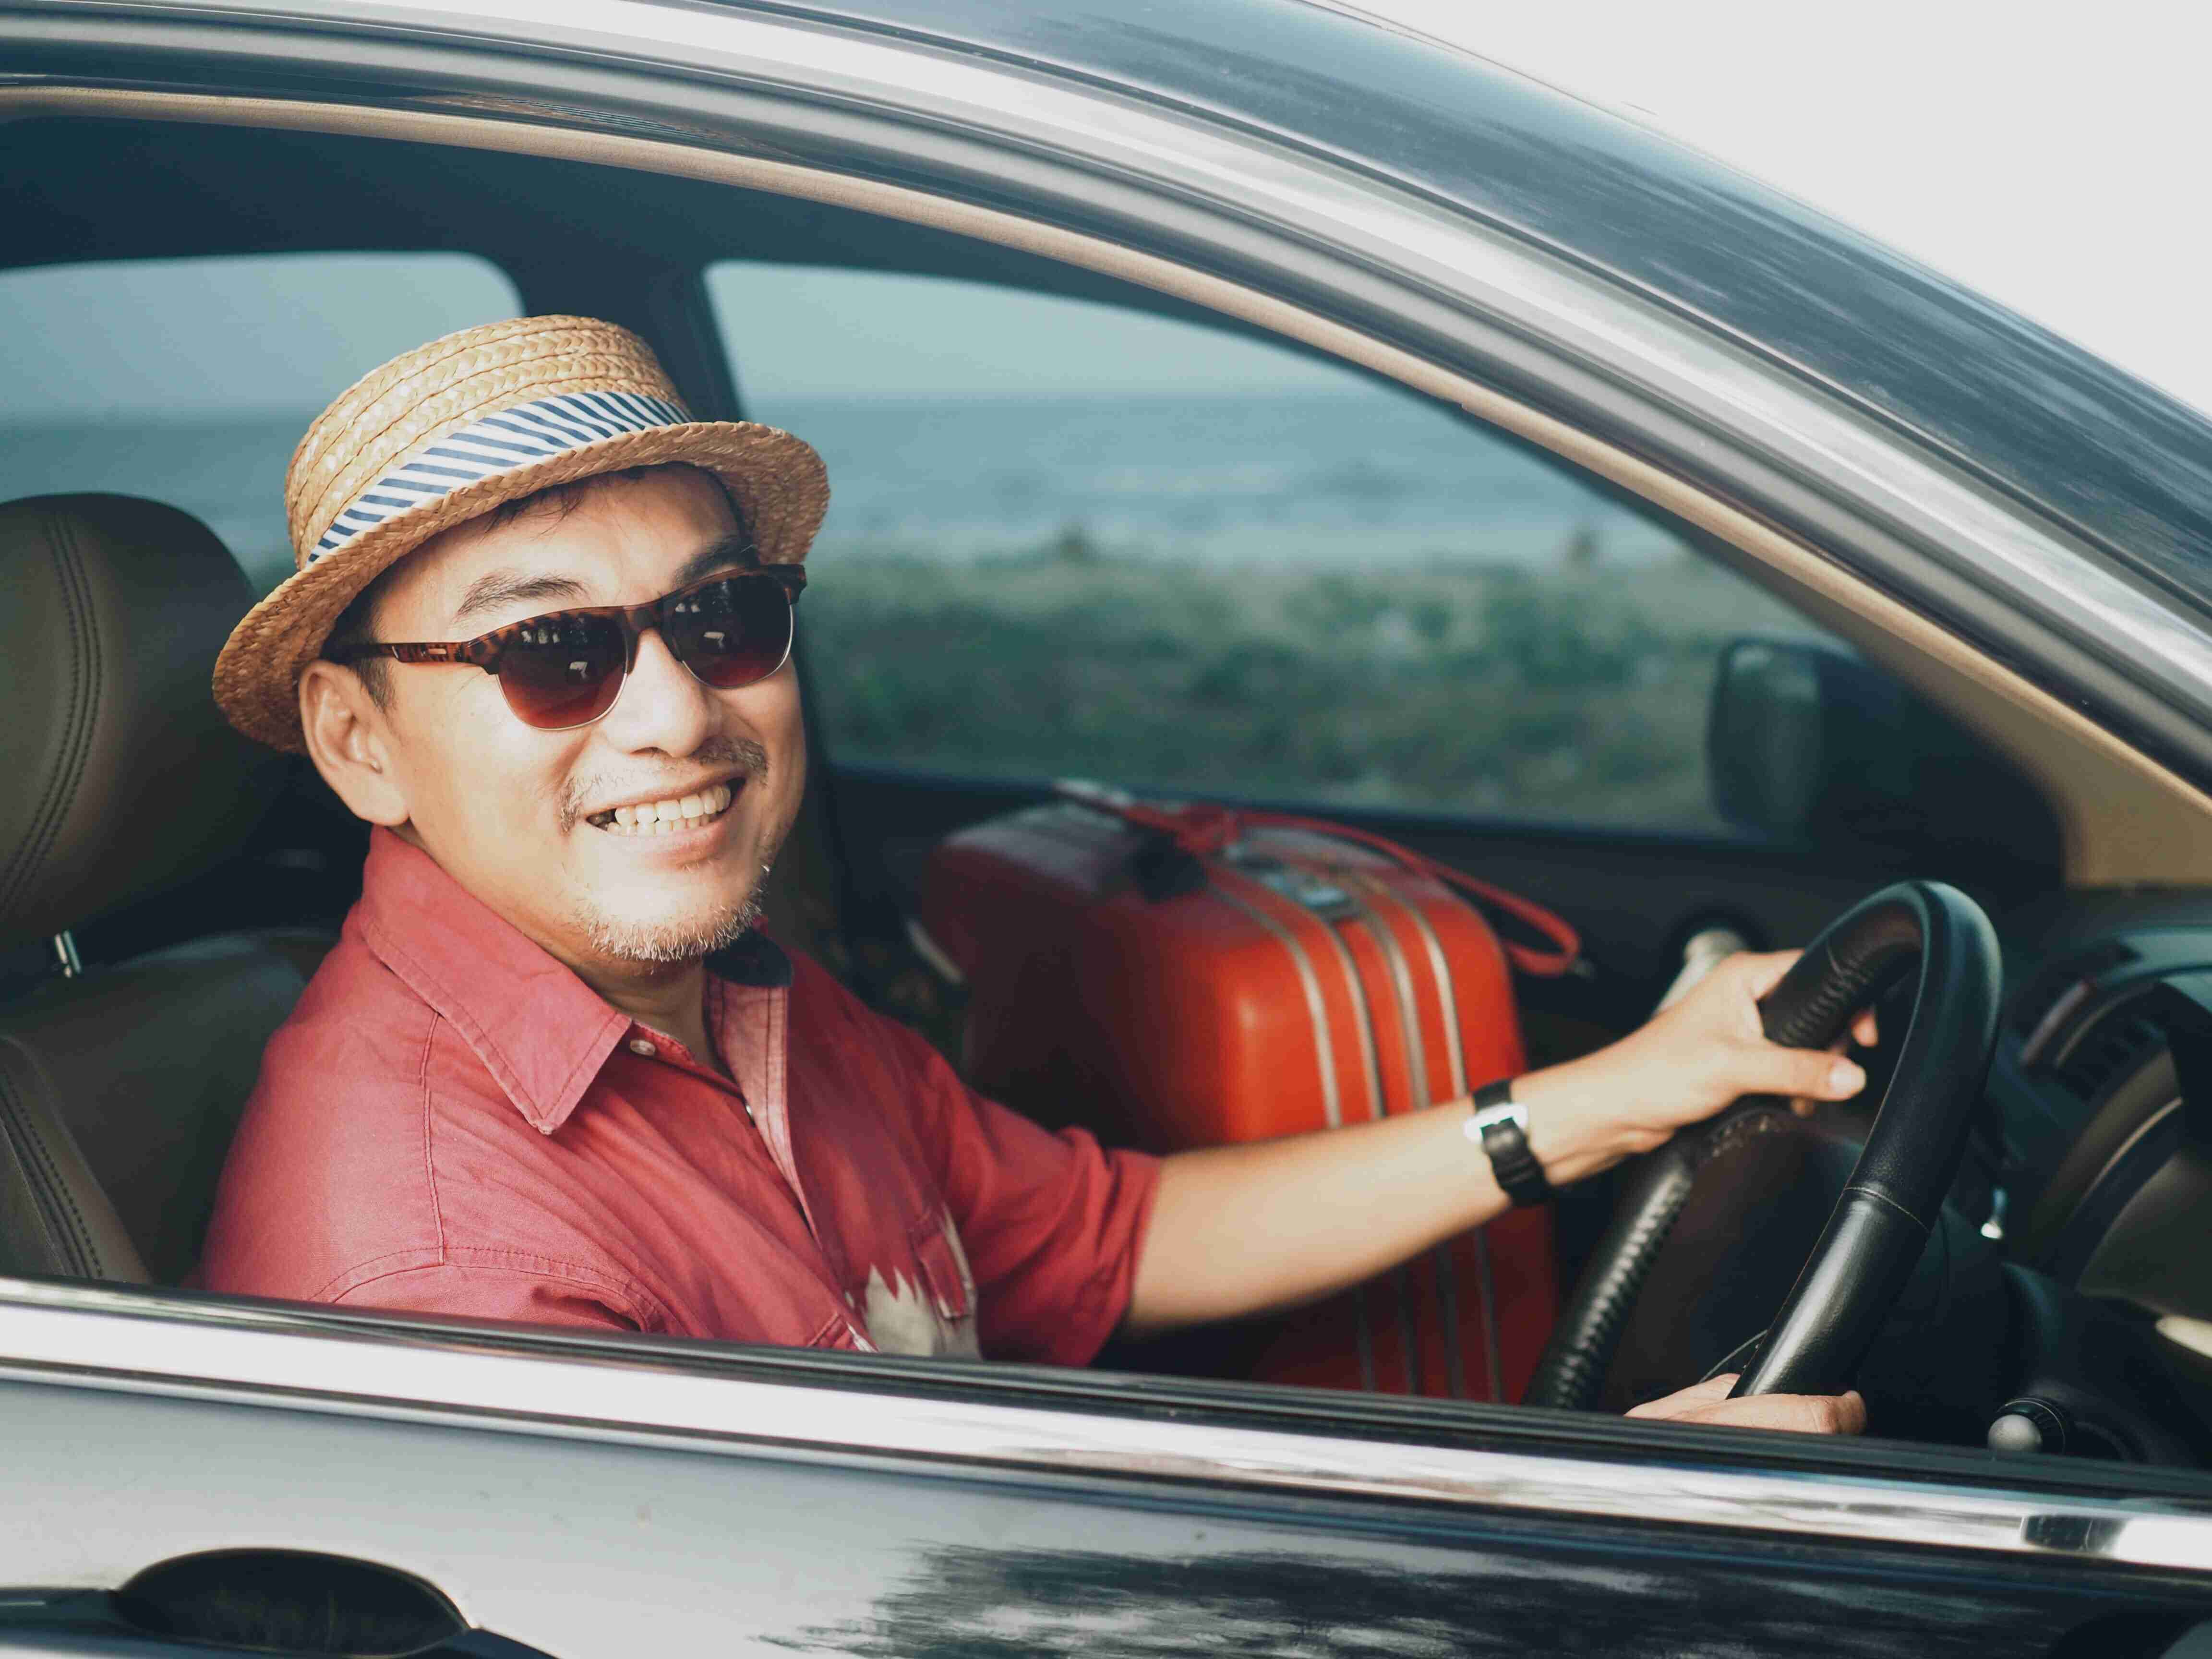 Man in sunglasses and fedora hat travelling while on peritoneal dialysis